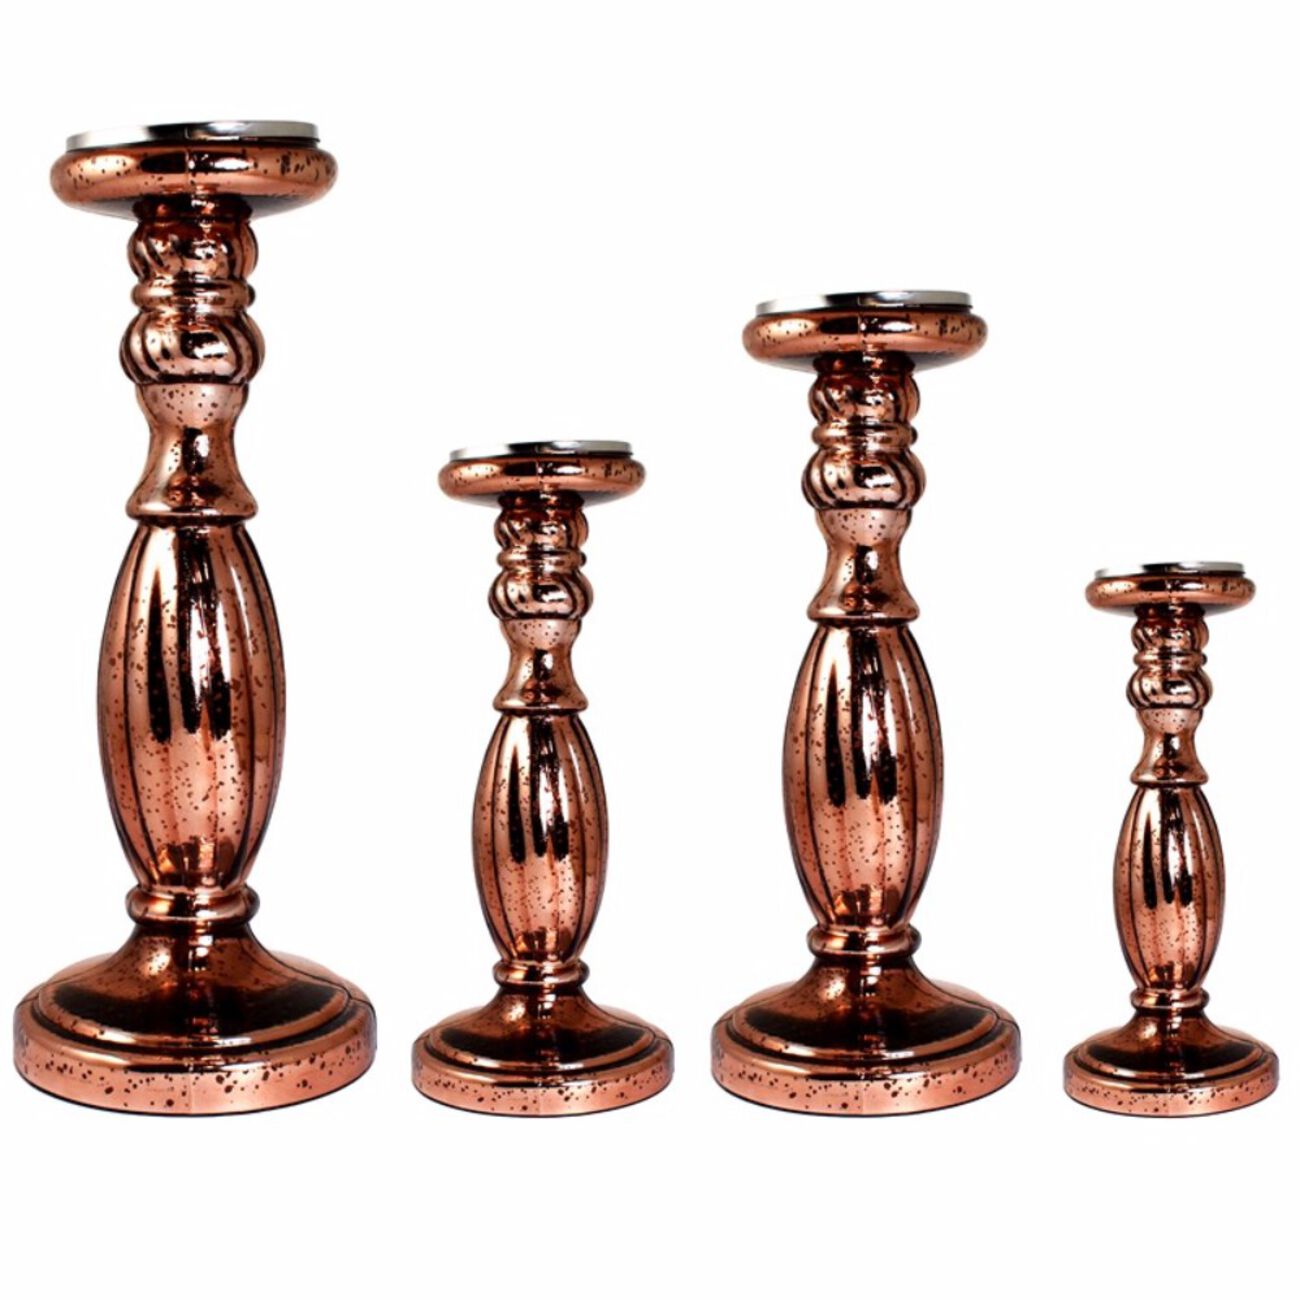 Vintage Style 4 Piece Glass Candle Holder, Copper